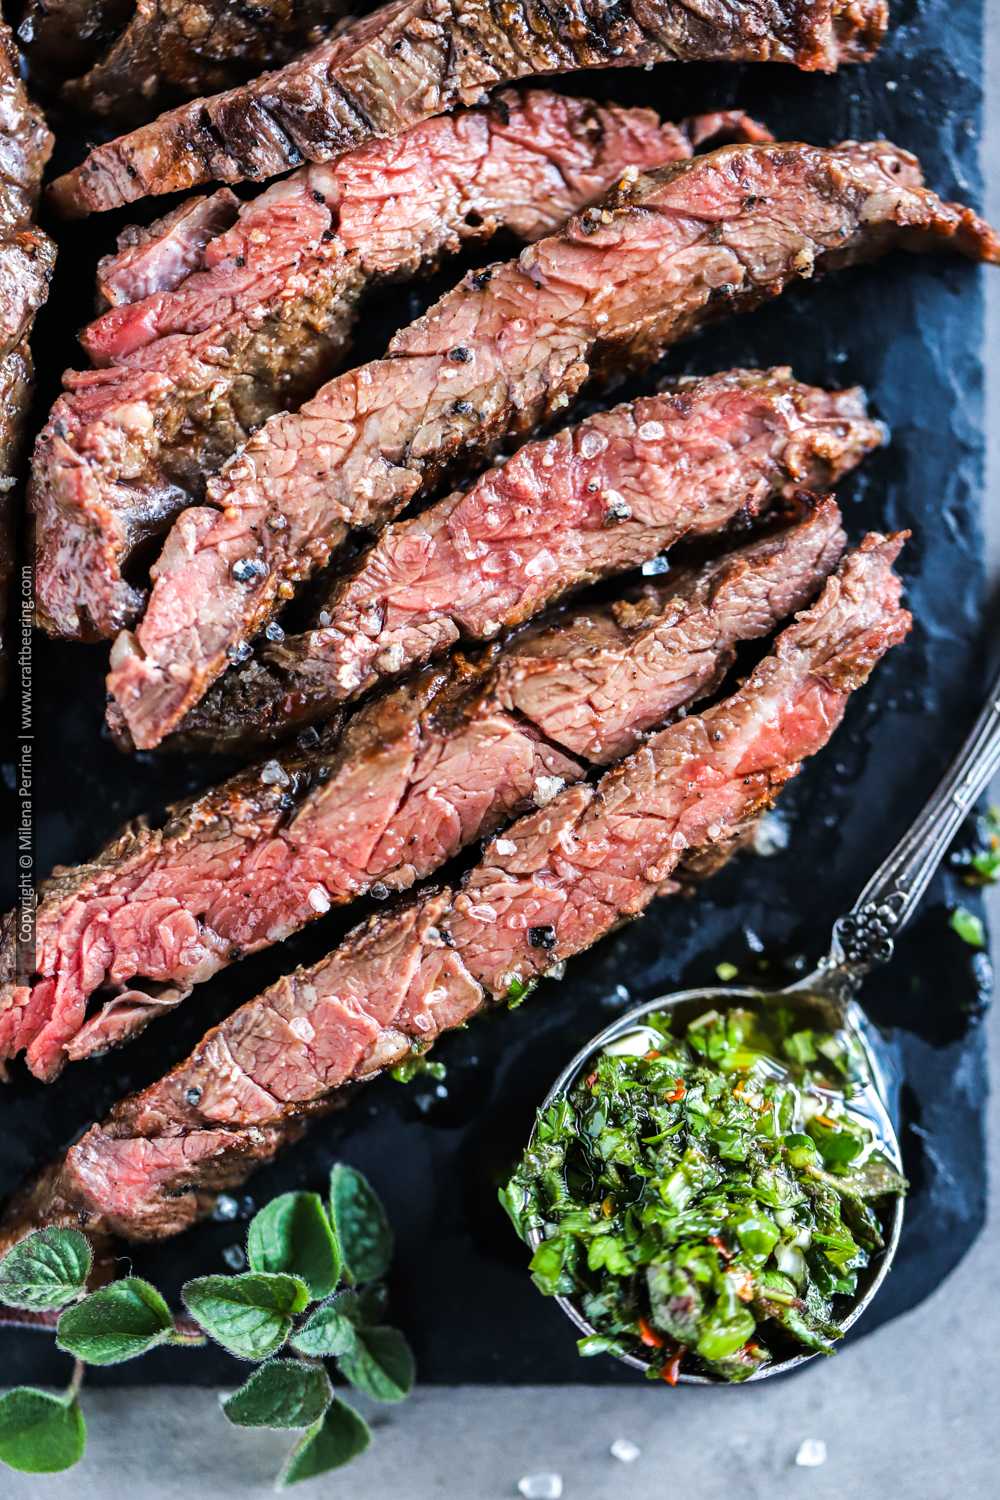 Outside skirt steak Argentinian style with chimichurri.